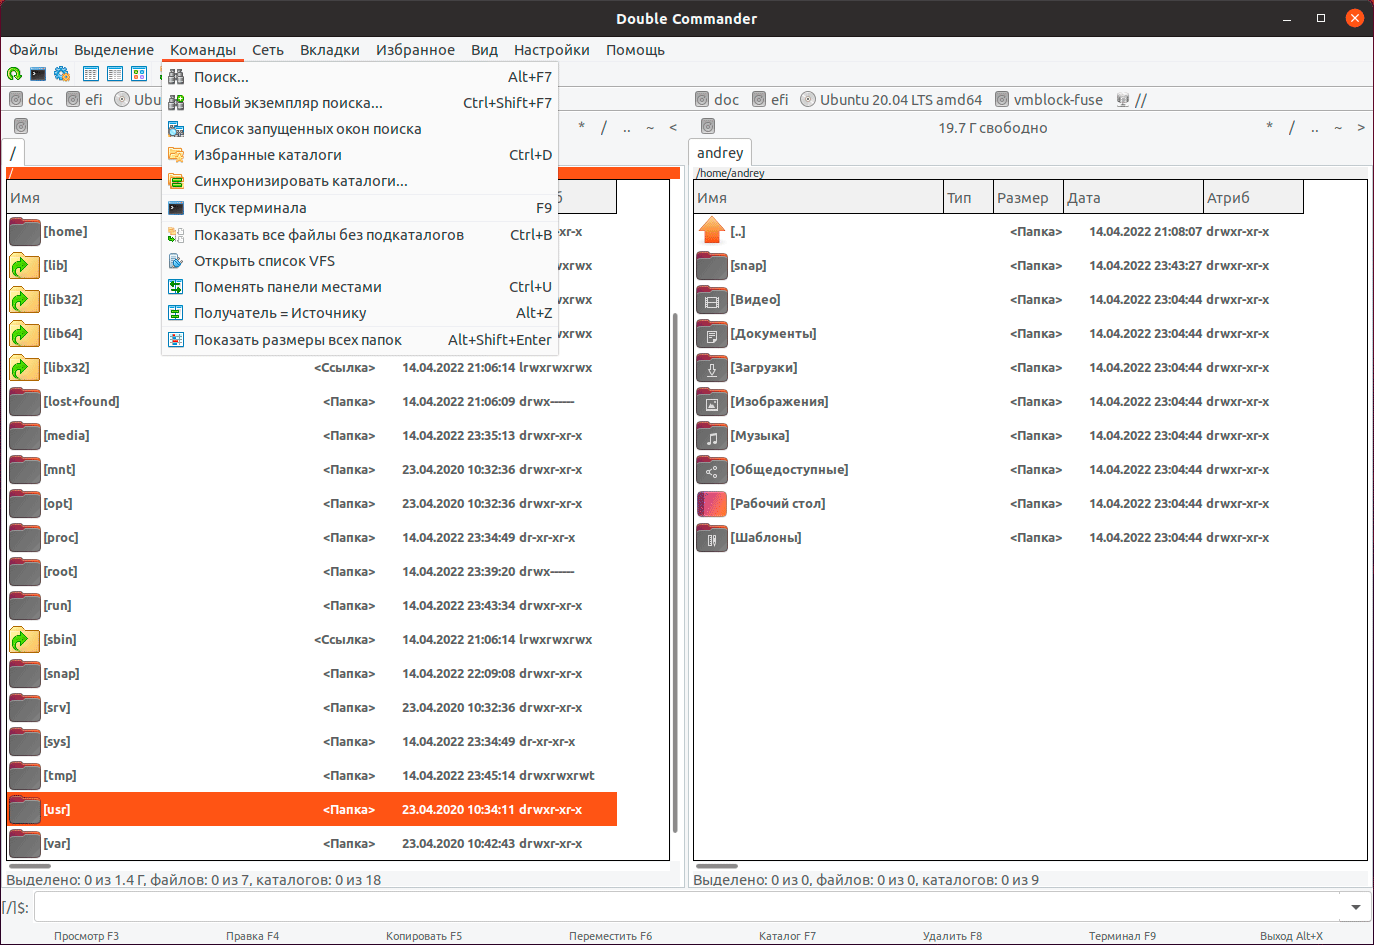 https://interface31.ru/tech_it/images/dual-pane-file-manager-linux-005.png